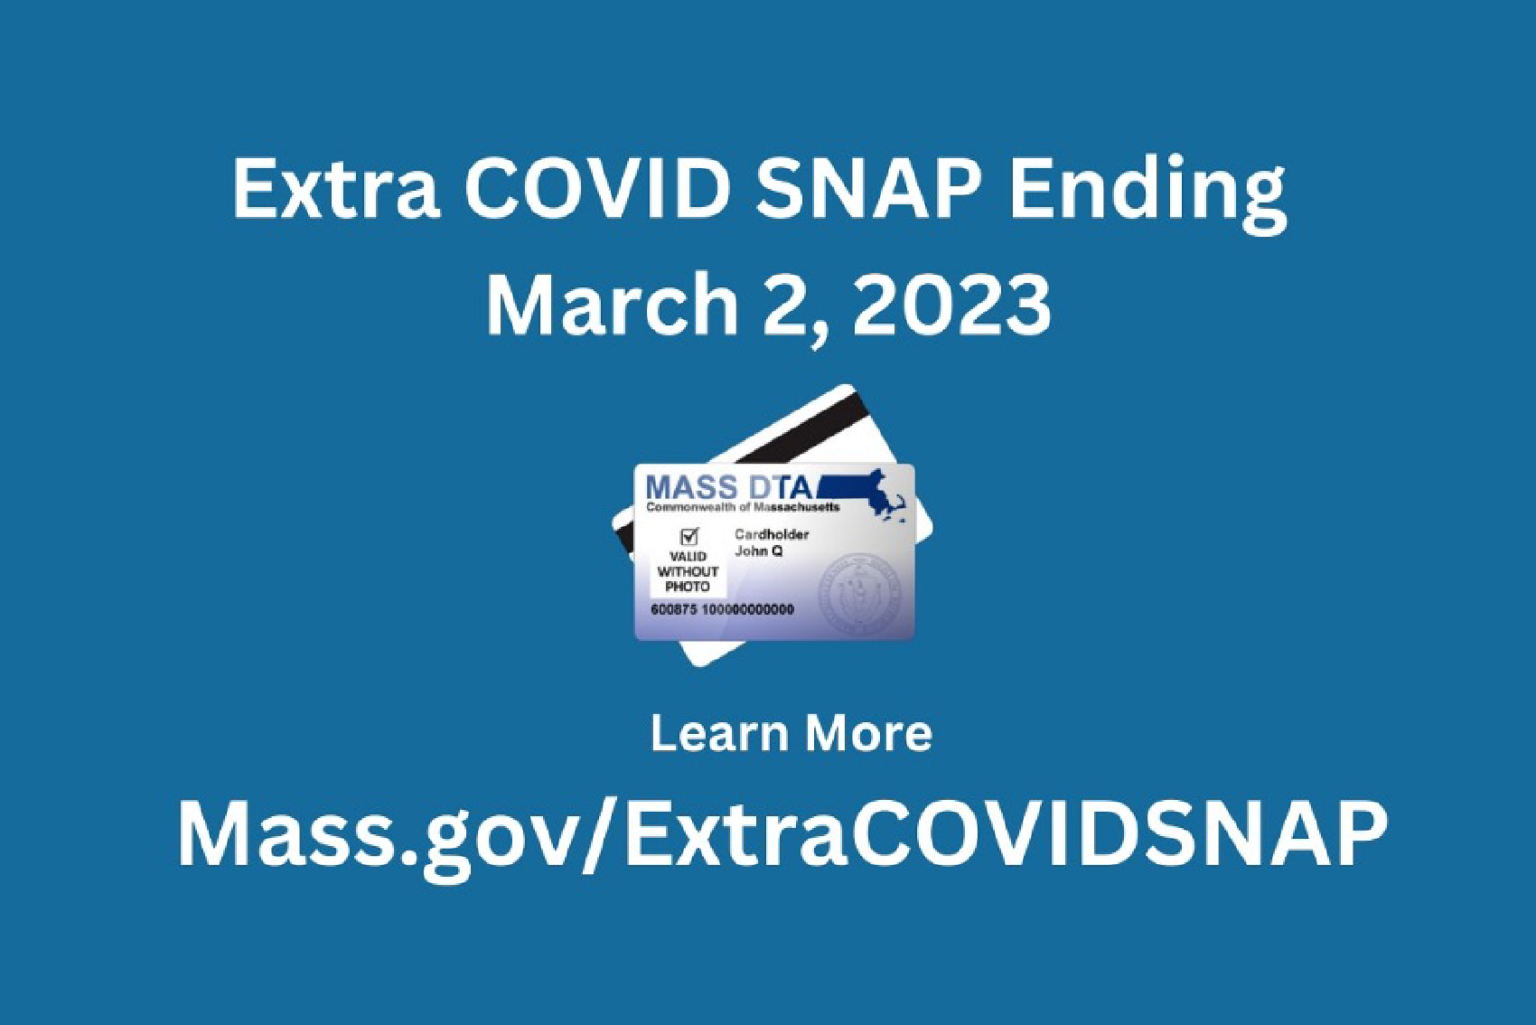 Extra COVID SNAP ending March 2, 2023